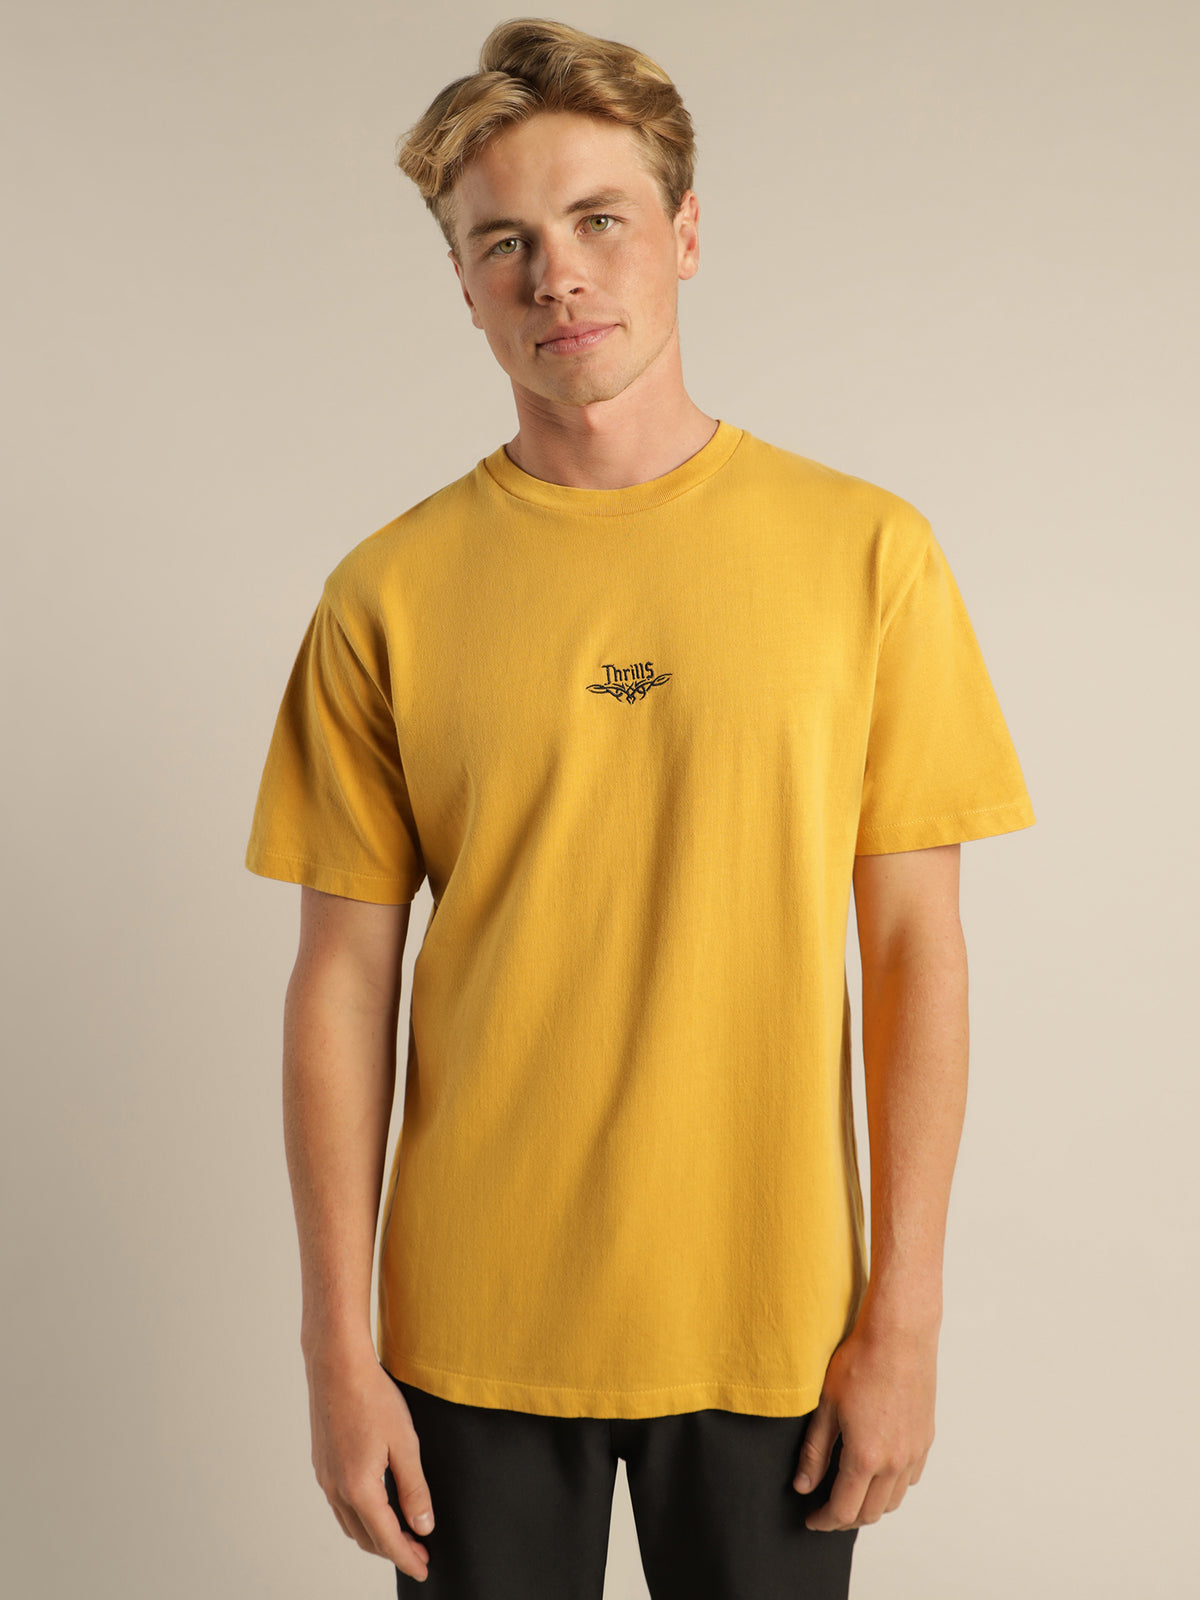 Lords Merch Fit T-Shirt in Mineral Yellow